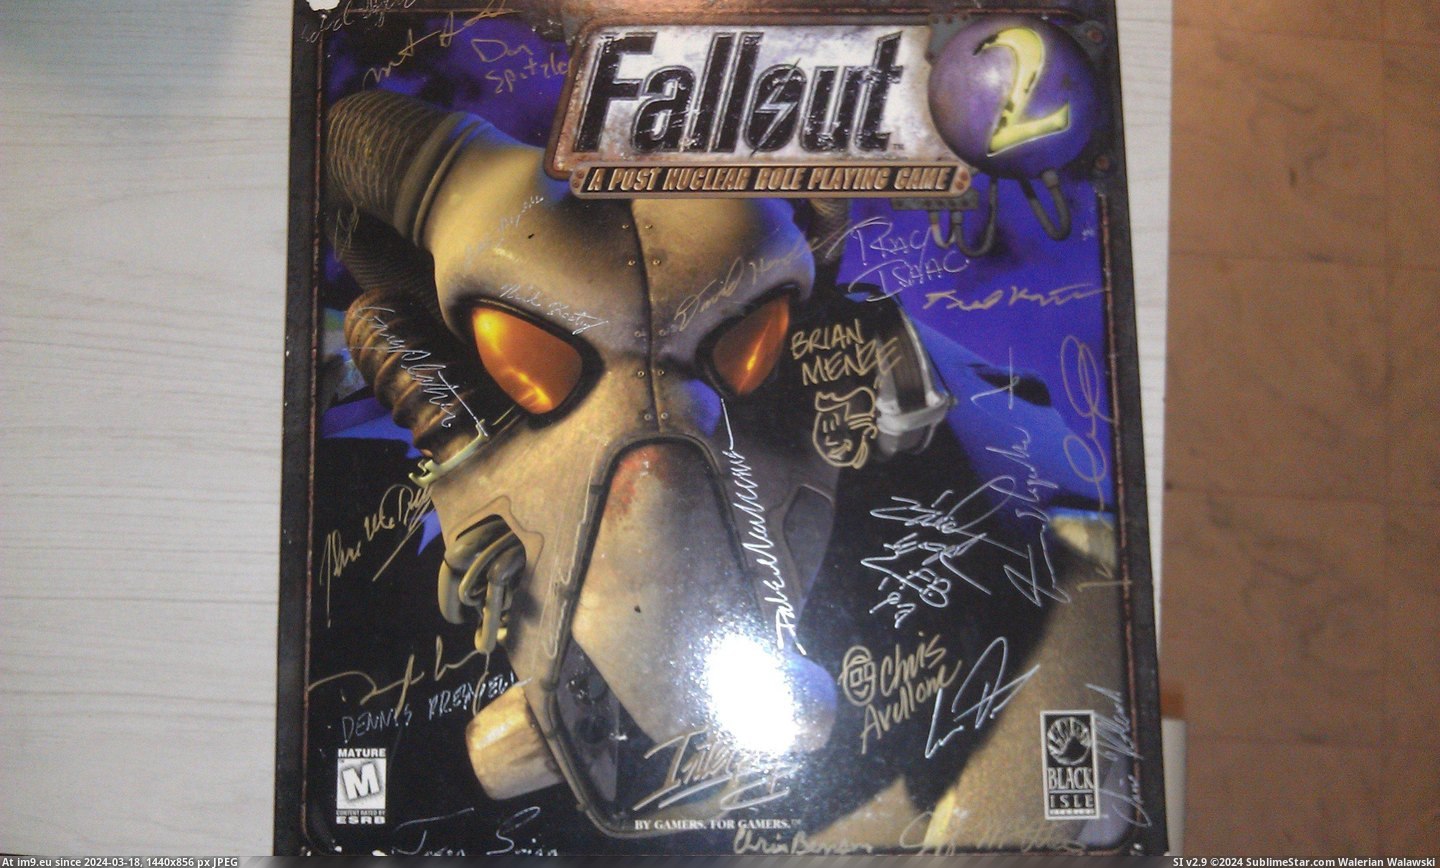 #Gaming #Out #Team #Contest #Development #Dug #Won #Fallout #Signed [Gaming] Dug this out. My copy of Fallout 2 signed by the development team that I won in a contest. Pic. (Bild von album My r/GAMING favs))